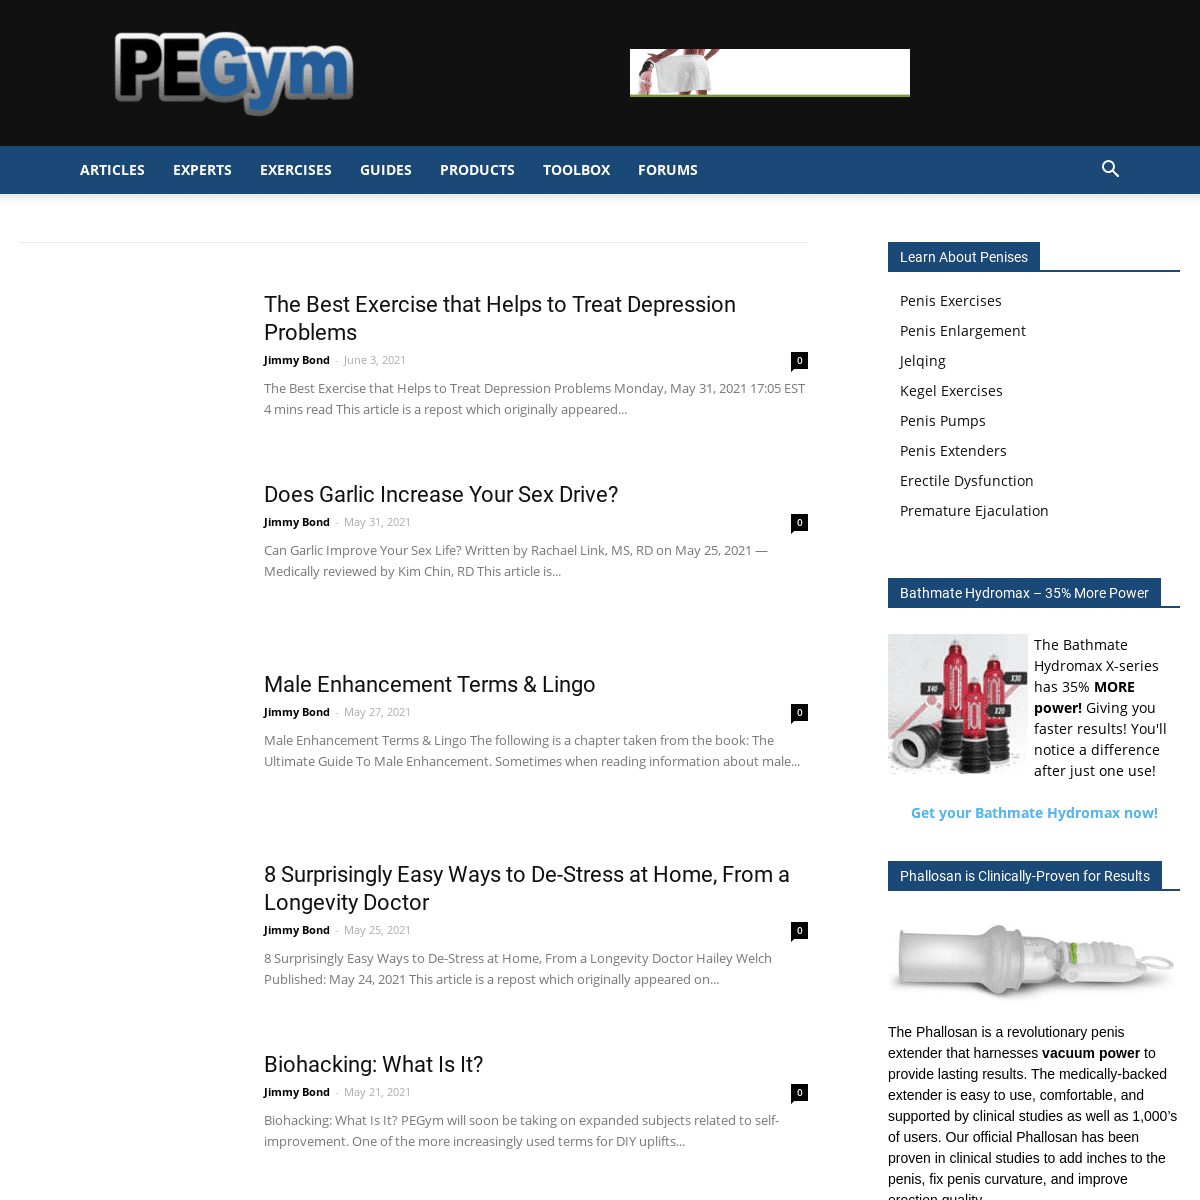 A complete backup of https://pegym.com